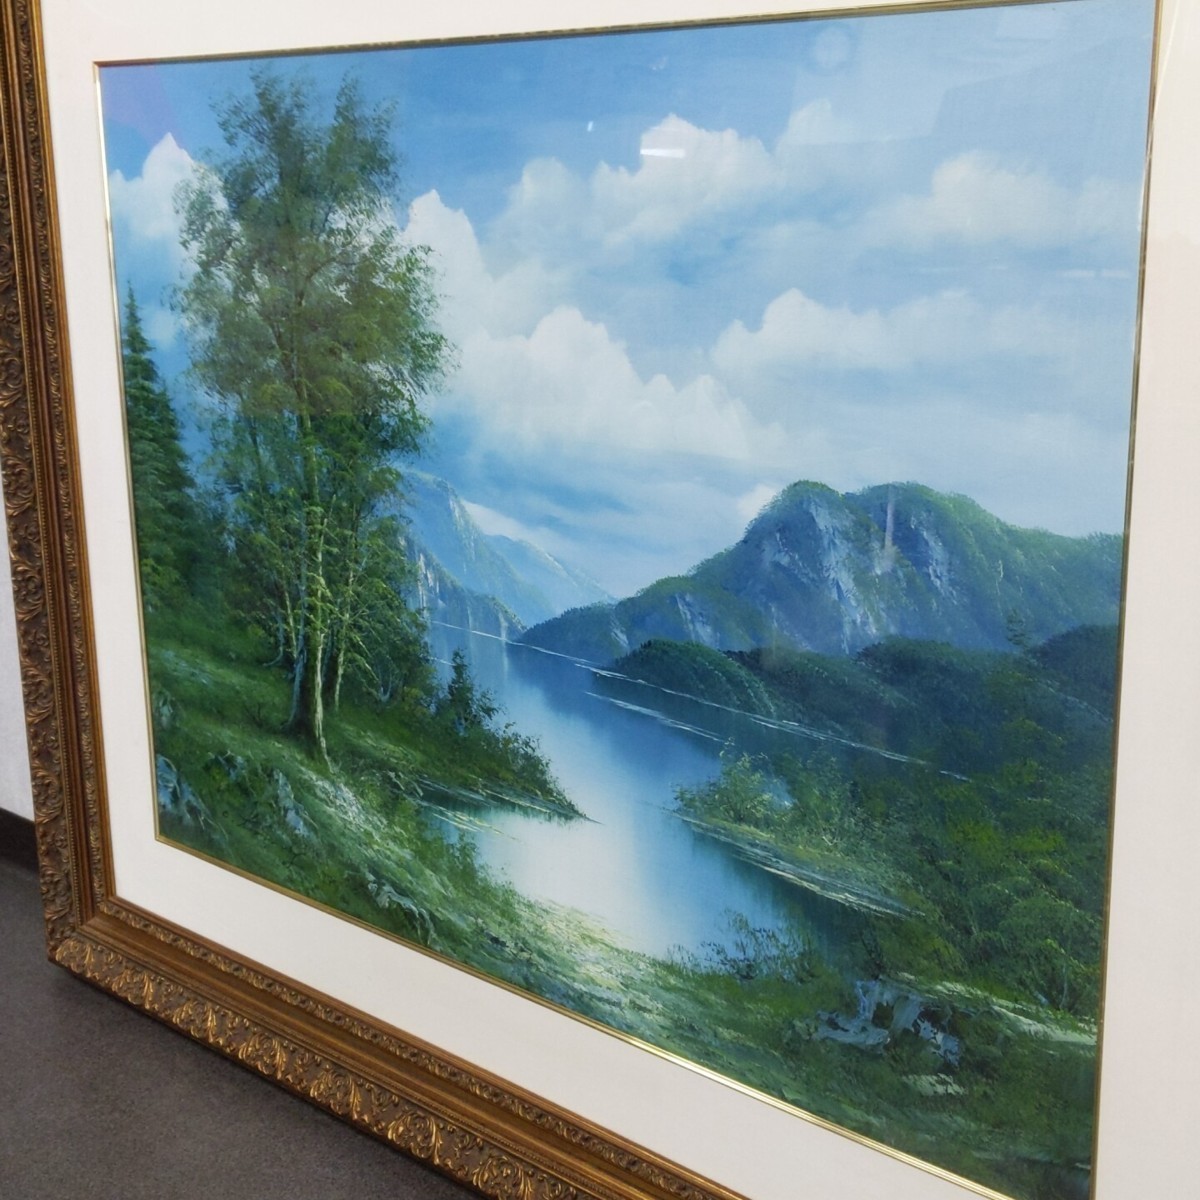 [ Sagawa 240i1257] picture oil painting landscape painting nature amount entering oil painting picture frame attaching out amount size 114cm×91cm×4? author .. not. interior ornament 